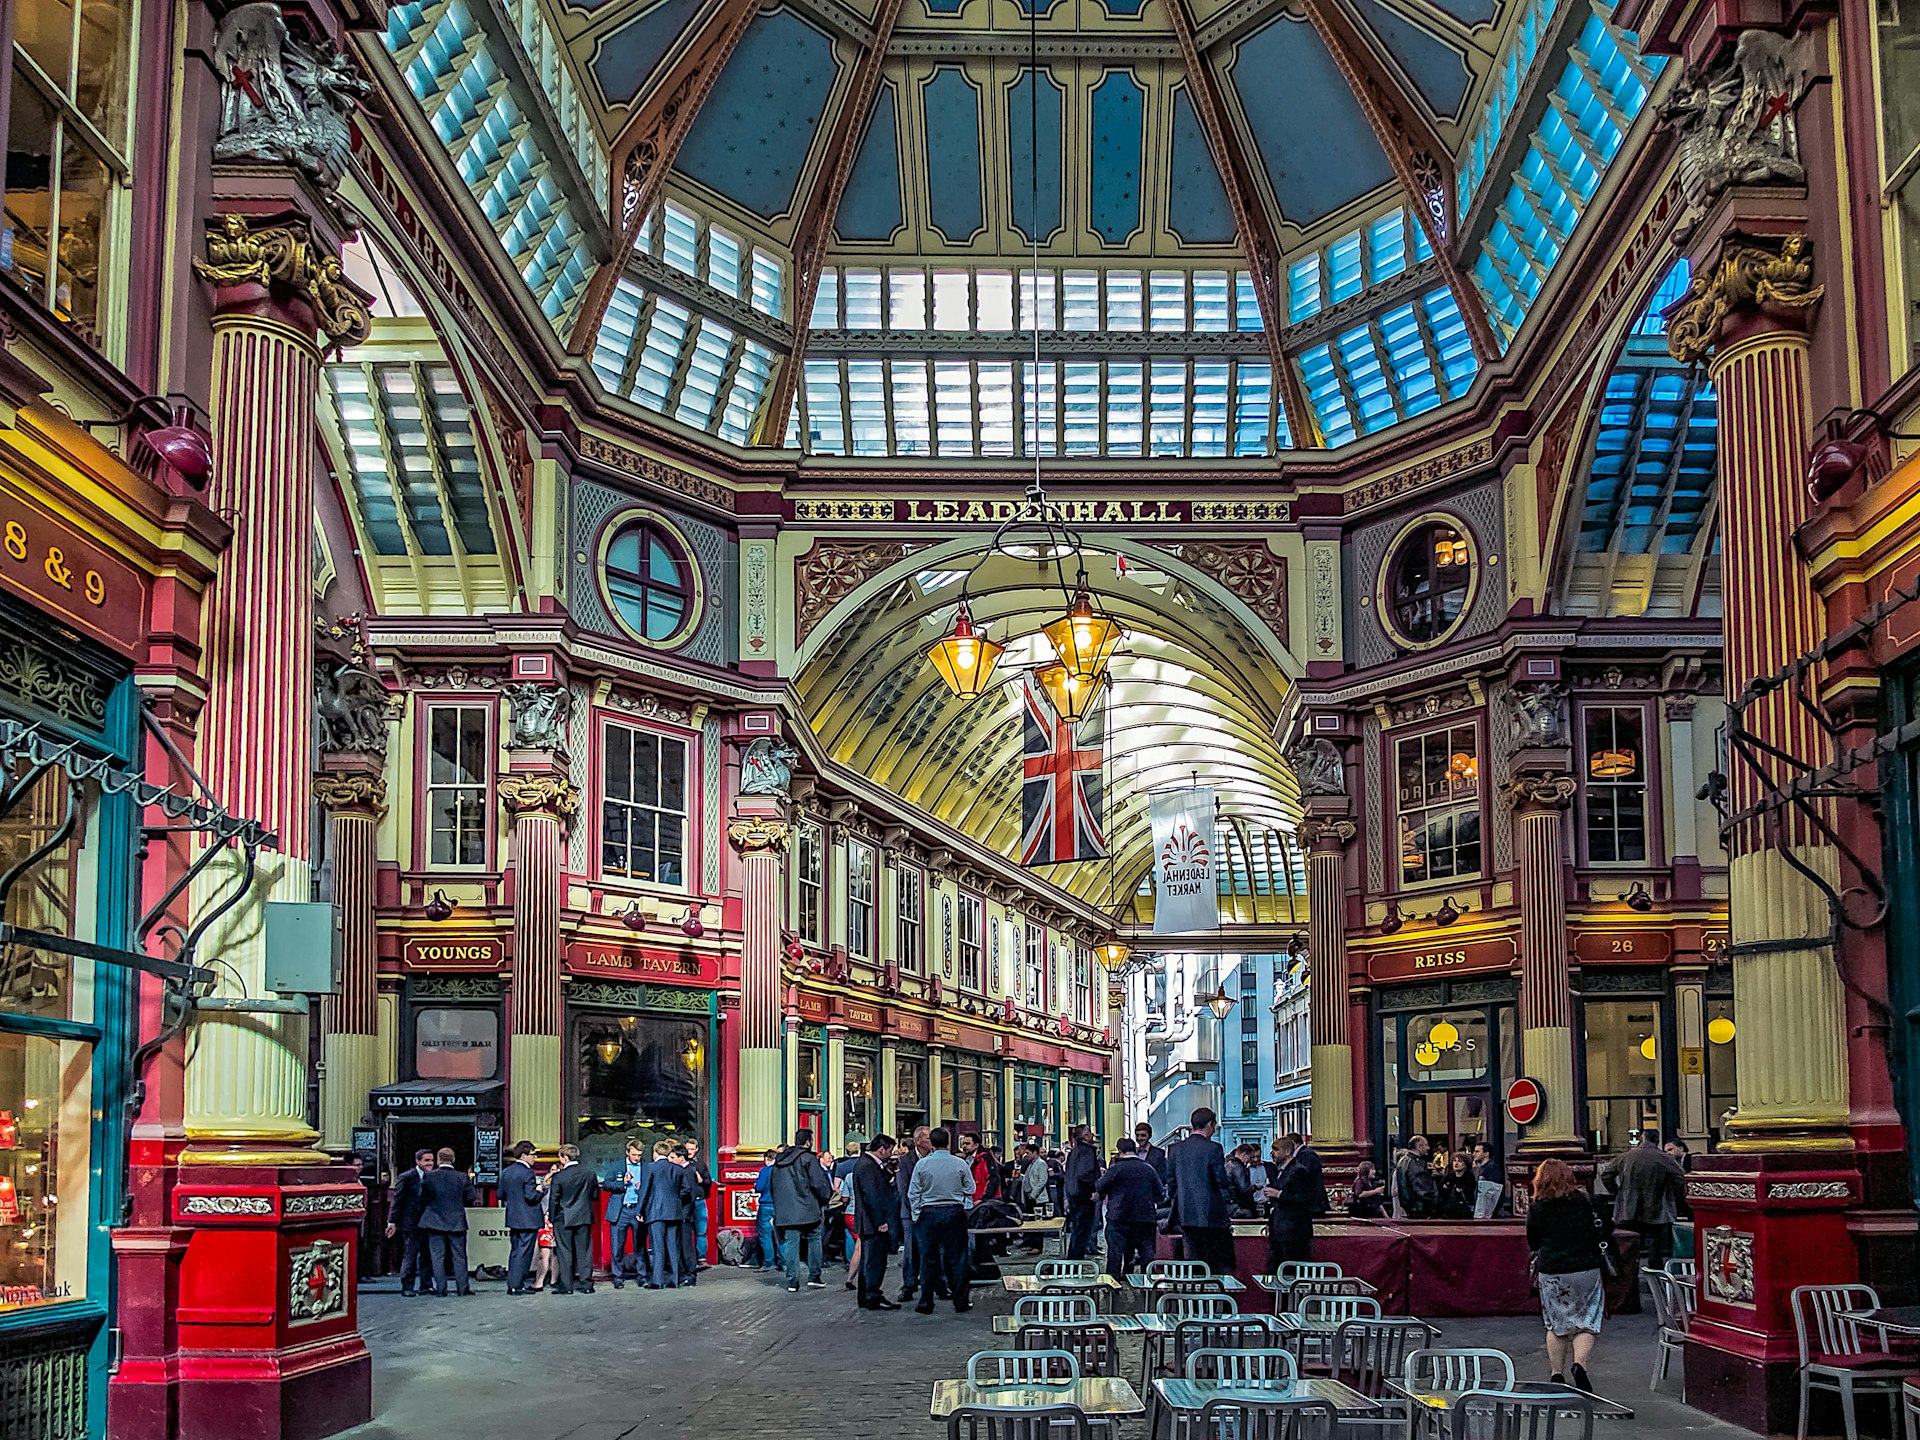 Leadenhall Market was used in the Harry Potter movies to represent Diagon Alley.